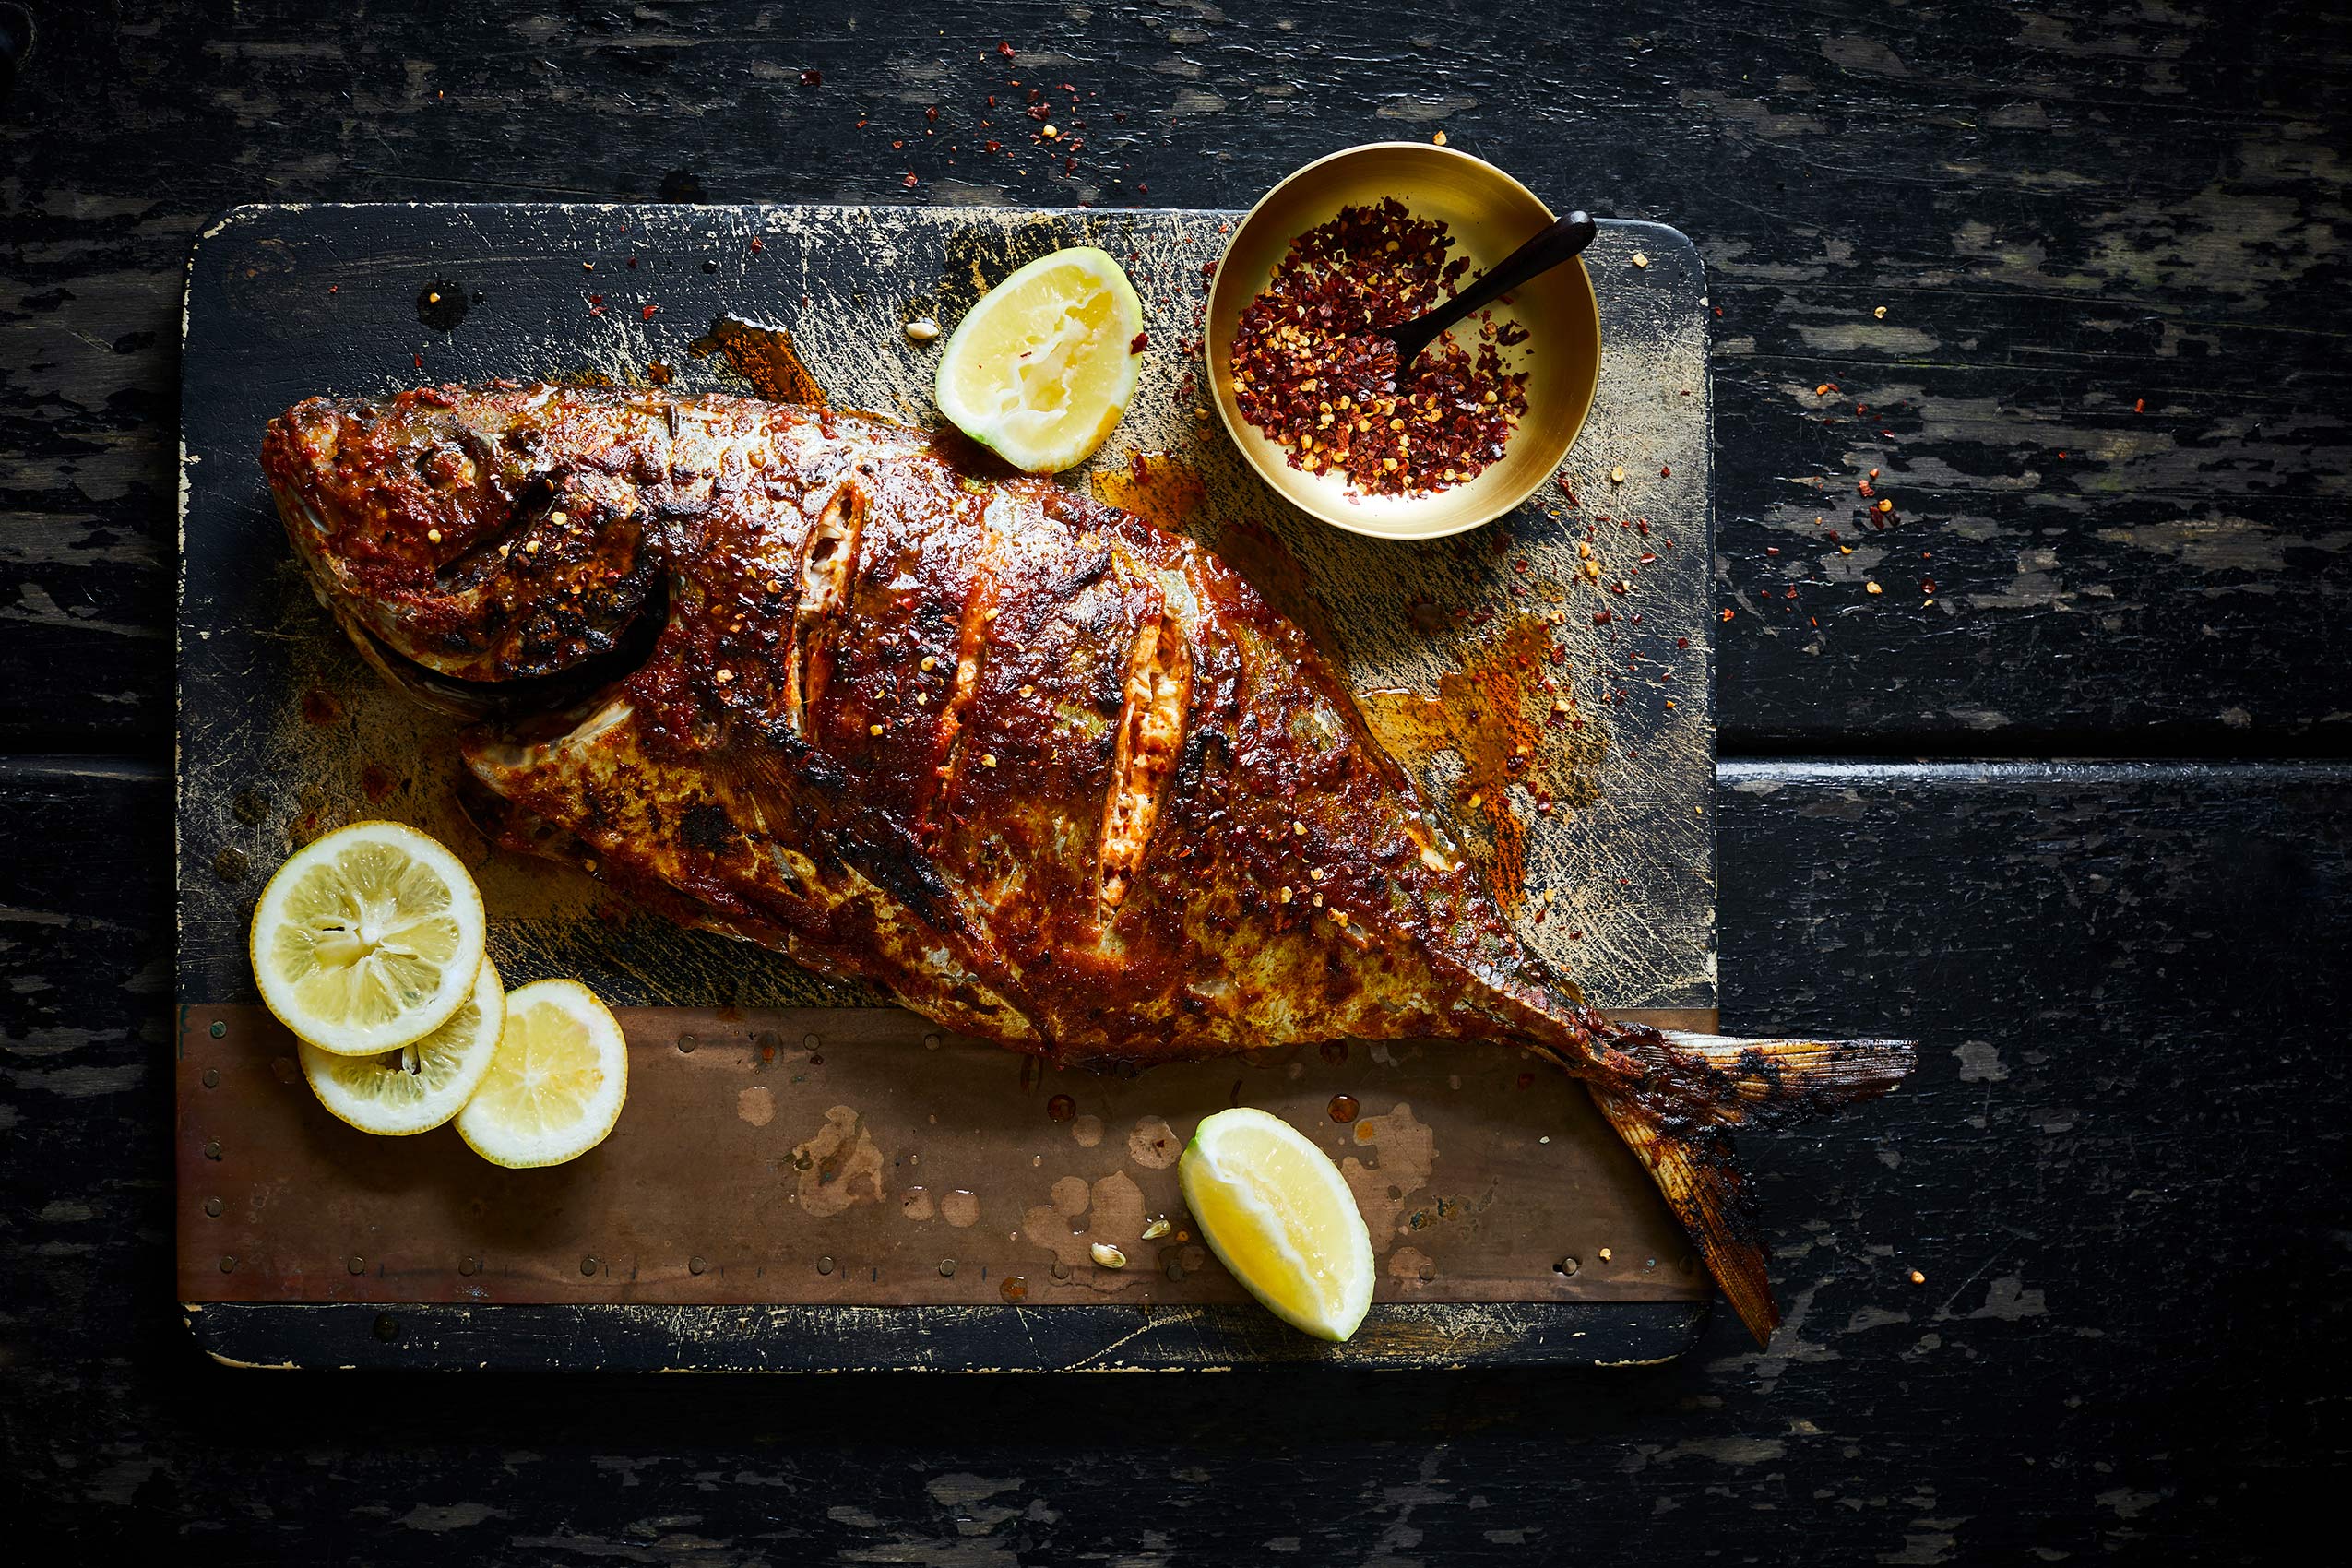 Masala Fish with Chilli & Lemon on Wooden Board • Advertising & Editorial Food Photography